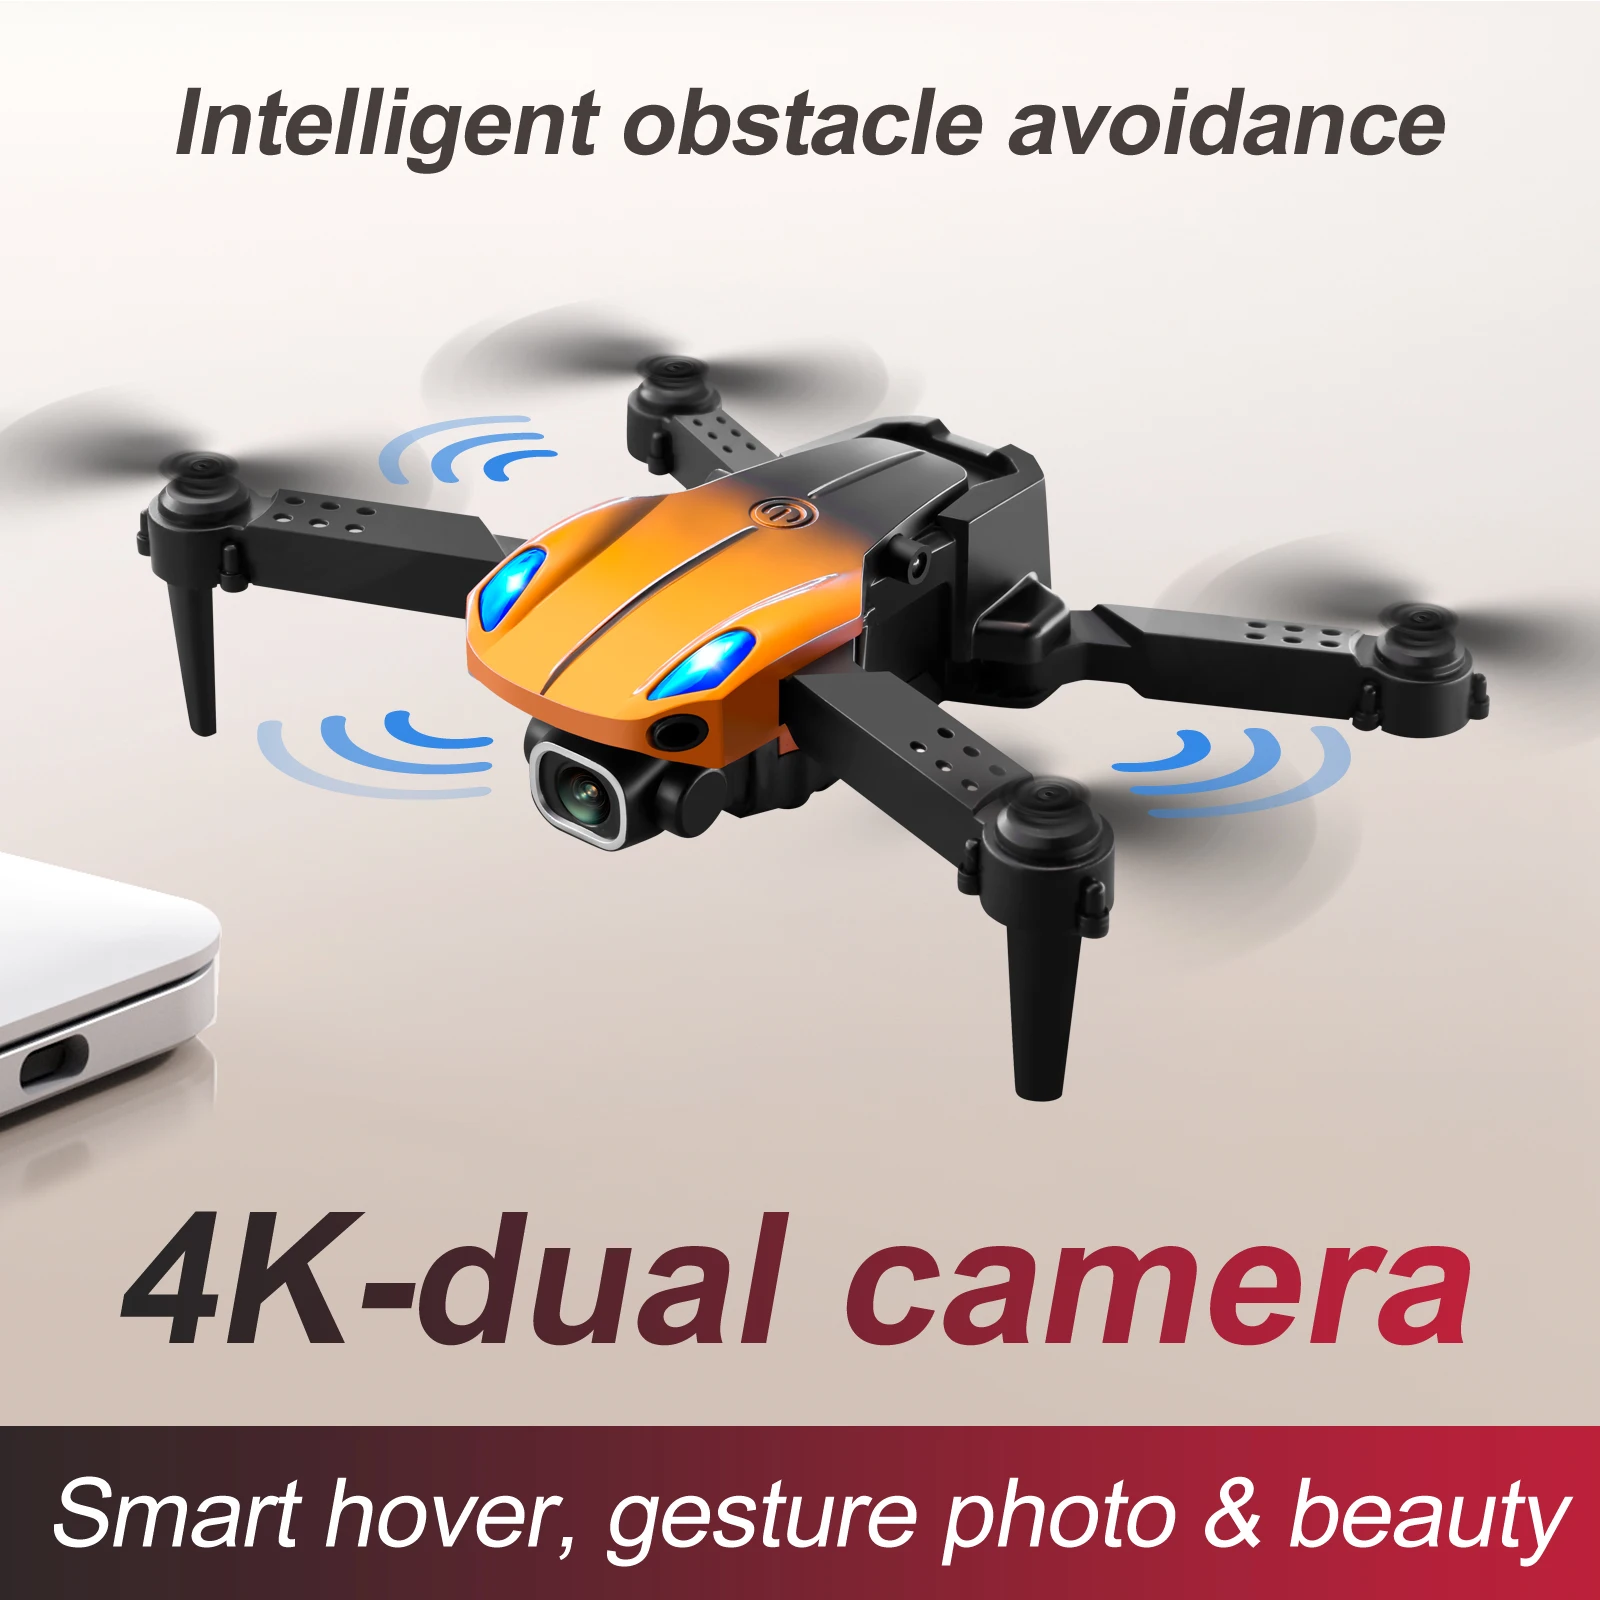 Enlarge Drone 4k Professional Rc Quadcopter Remote Control Toy Plane HD Camera Rc Plane Dual Camera 360° Roll 50x Zoom Smart Hover